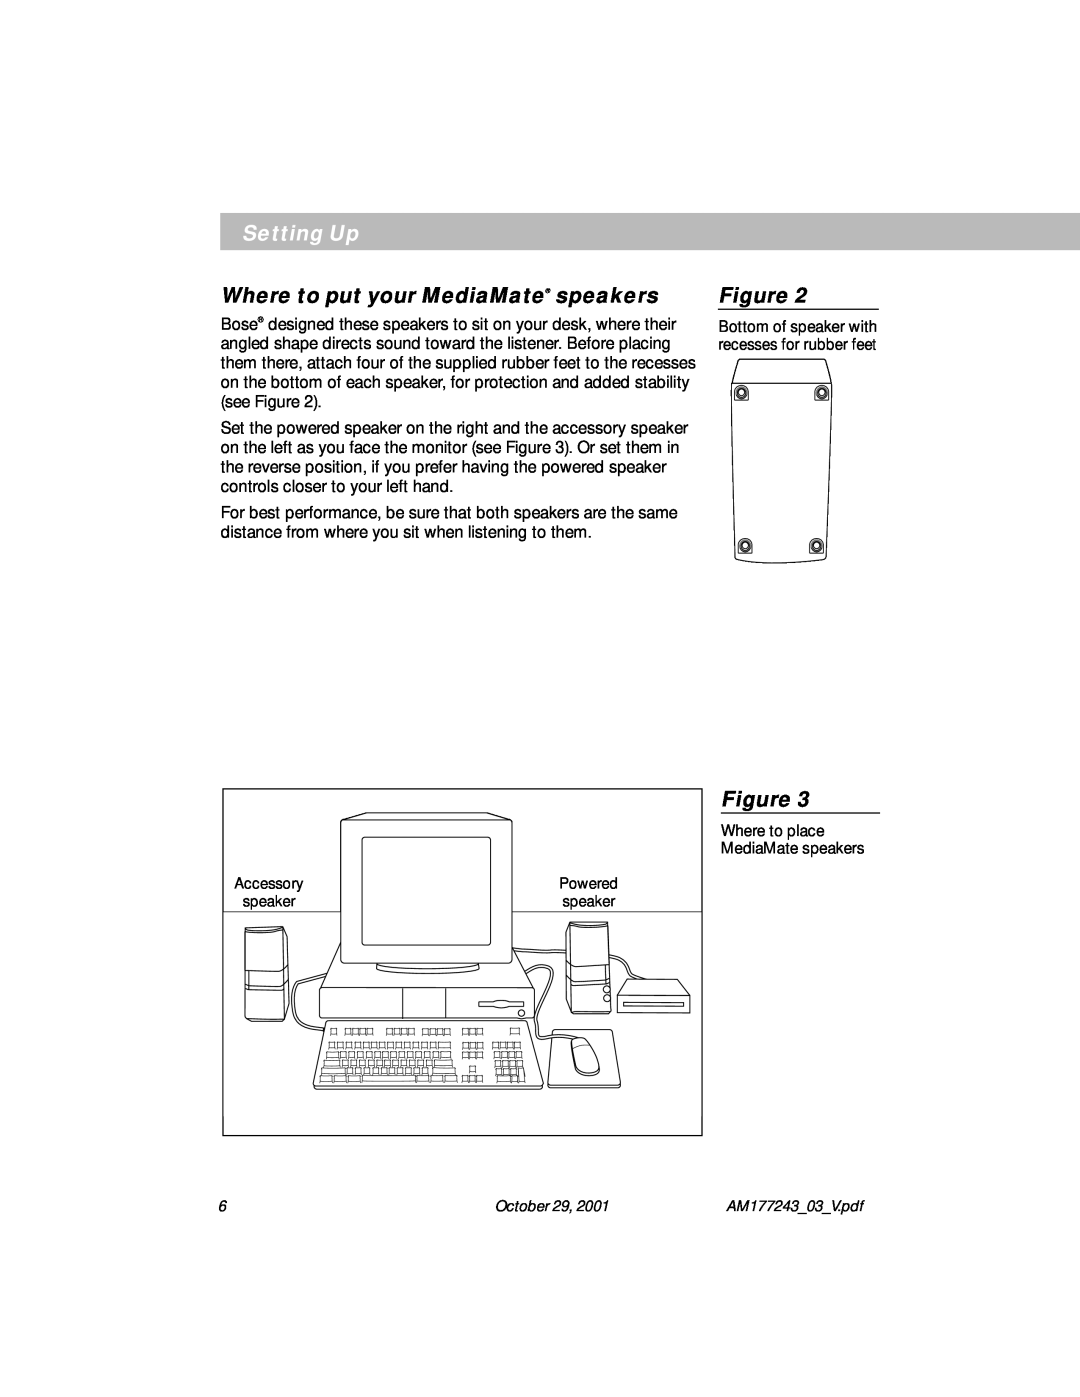 Bose Computer Speakers manual Setting Up, Where to put your MediaMate speakers 